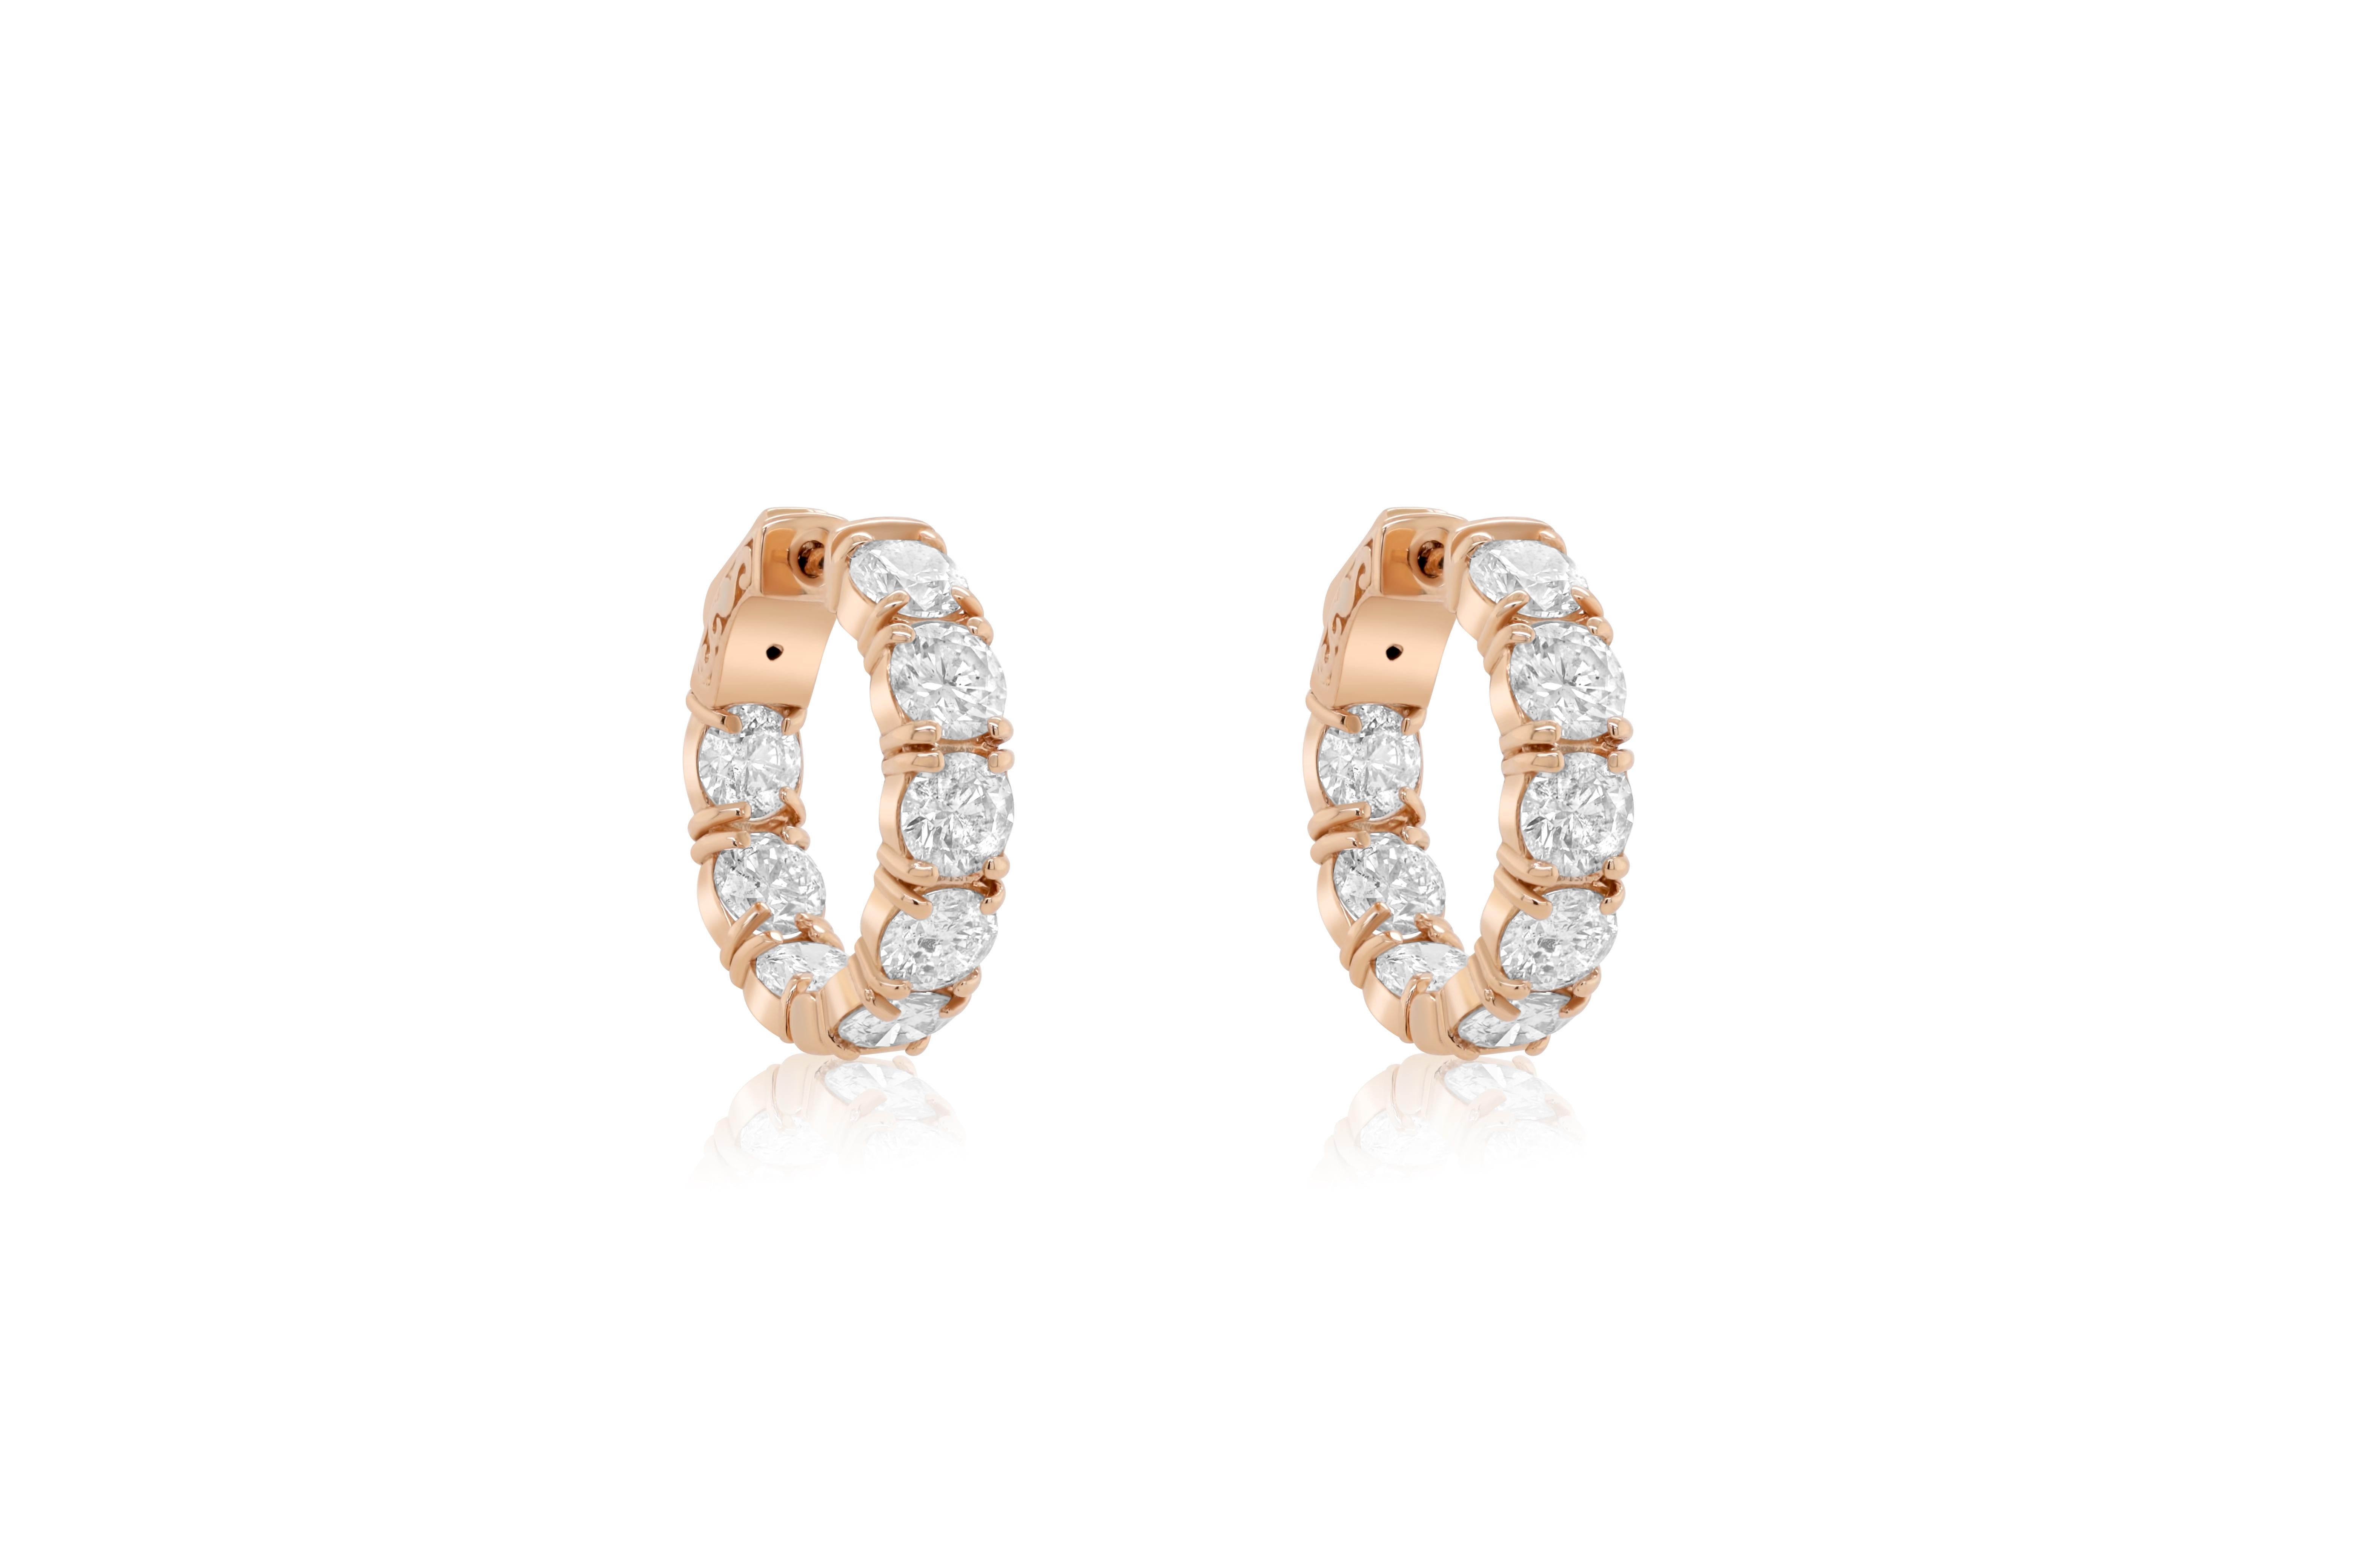 14KT Rose gold,diamond round hoop features  7.15crt of diamonds 20 stones.
Diana M. is a leading supplier of top-quality fine jewelry for over 35 years.
Diana M is one-stop shop for all your jewelry shopping, carrying line of diamond rings,